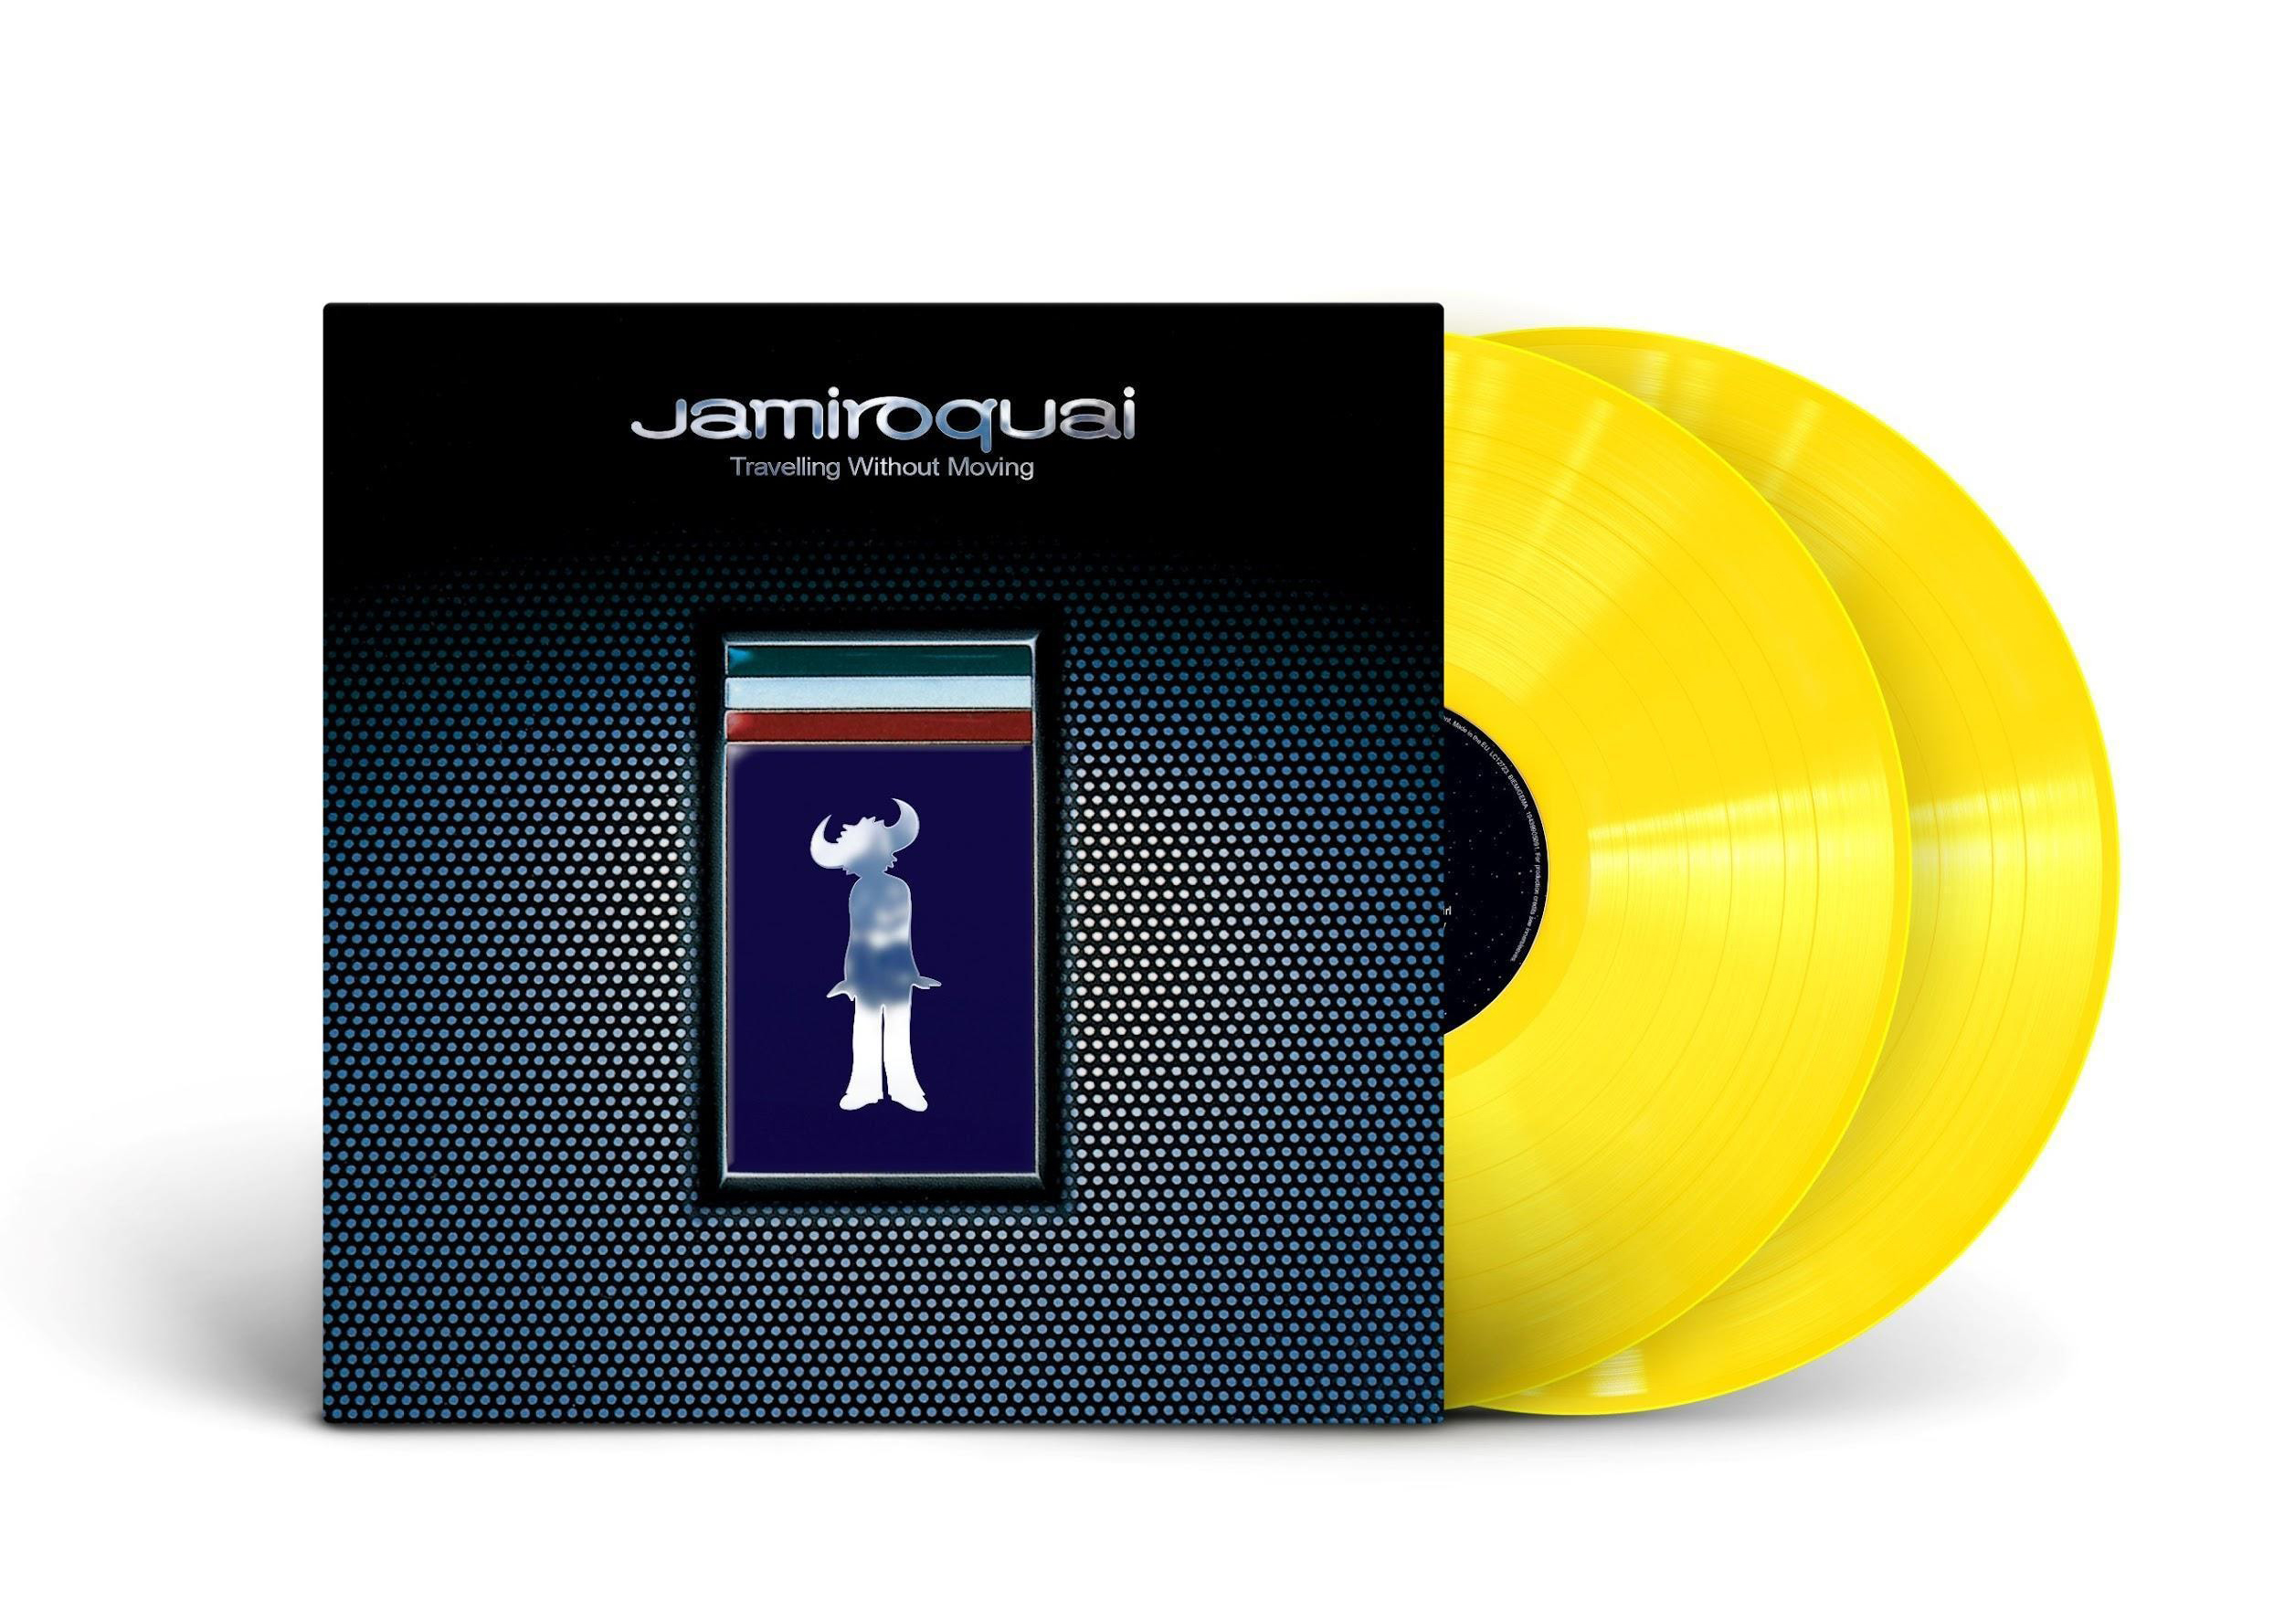 JAMIROQUAI announces 'Travelling Without Moving' (25th anniversary edition) 